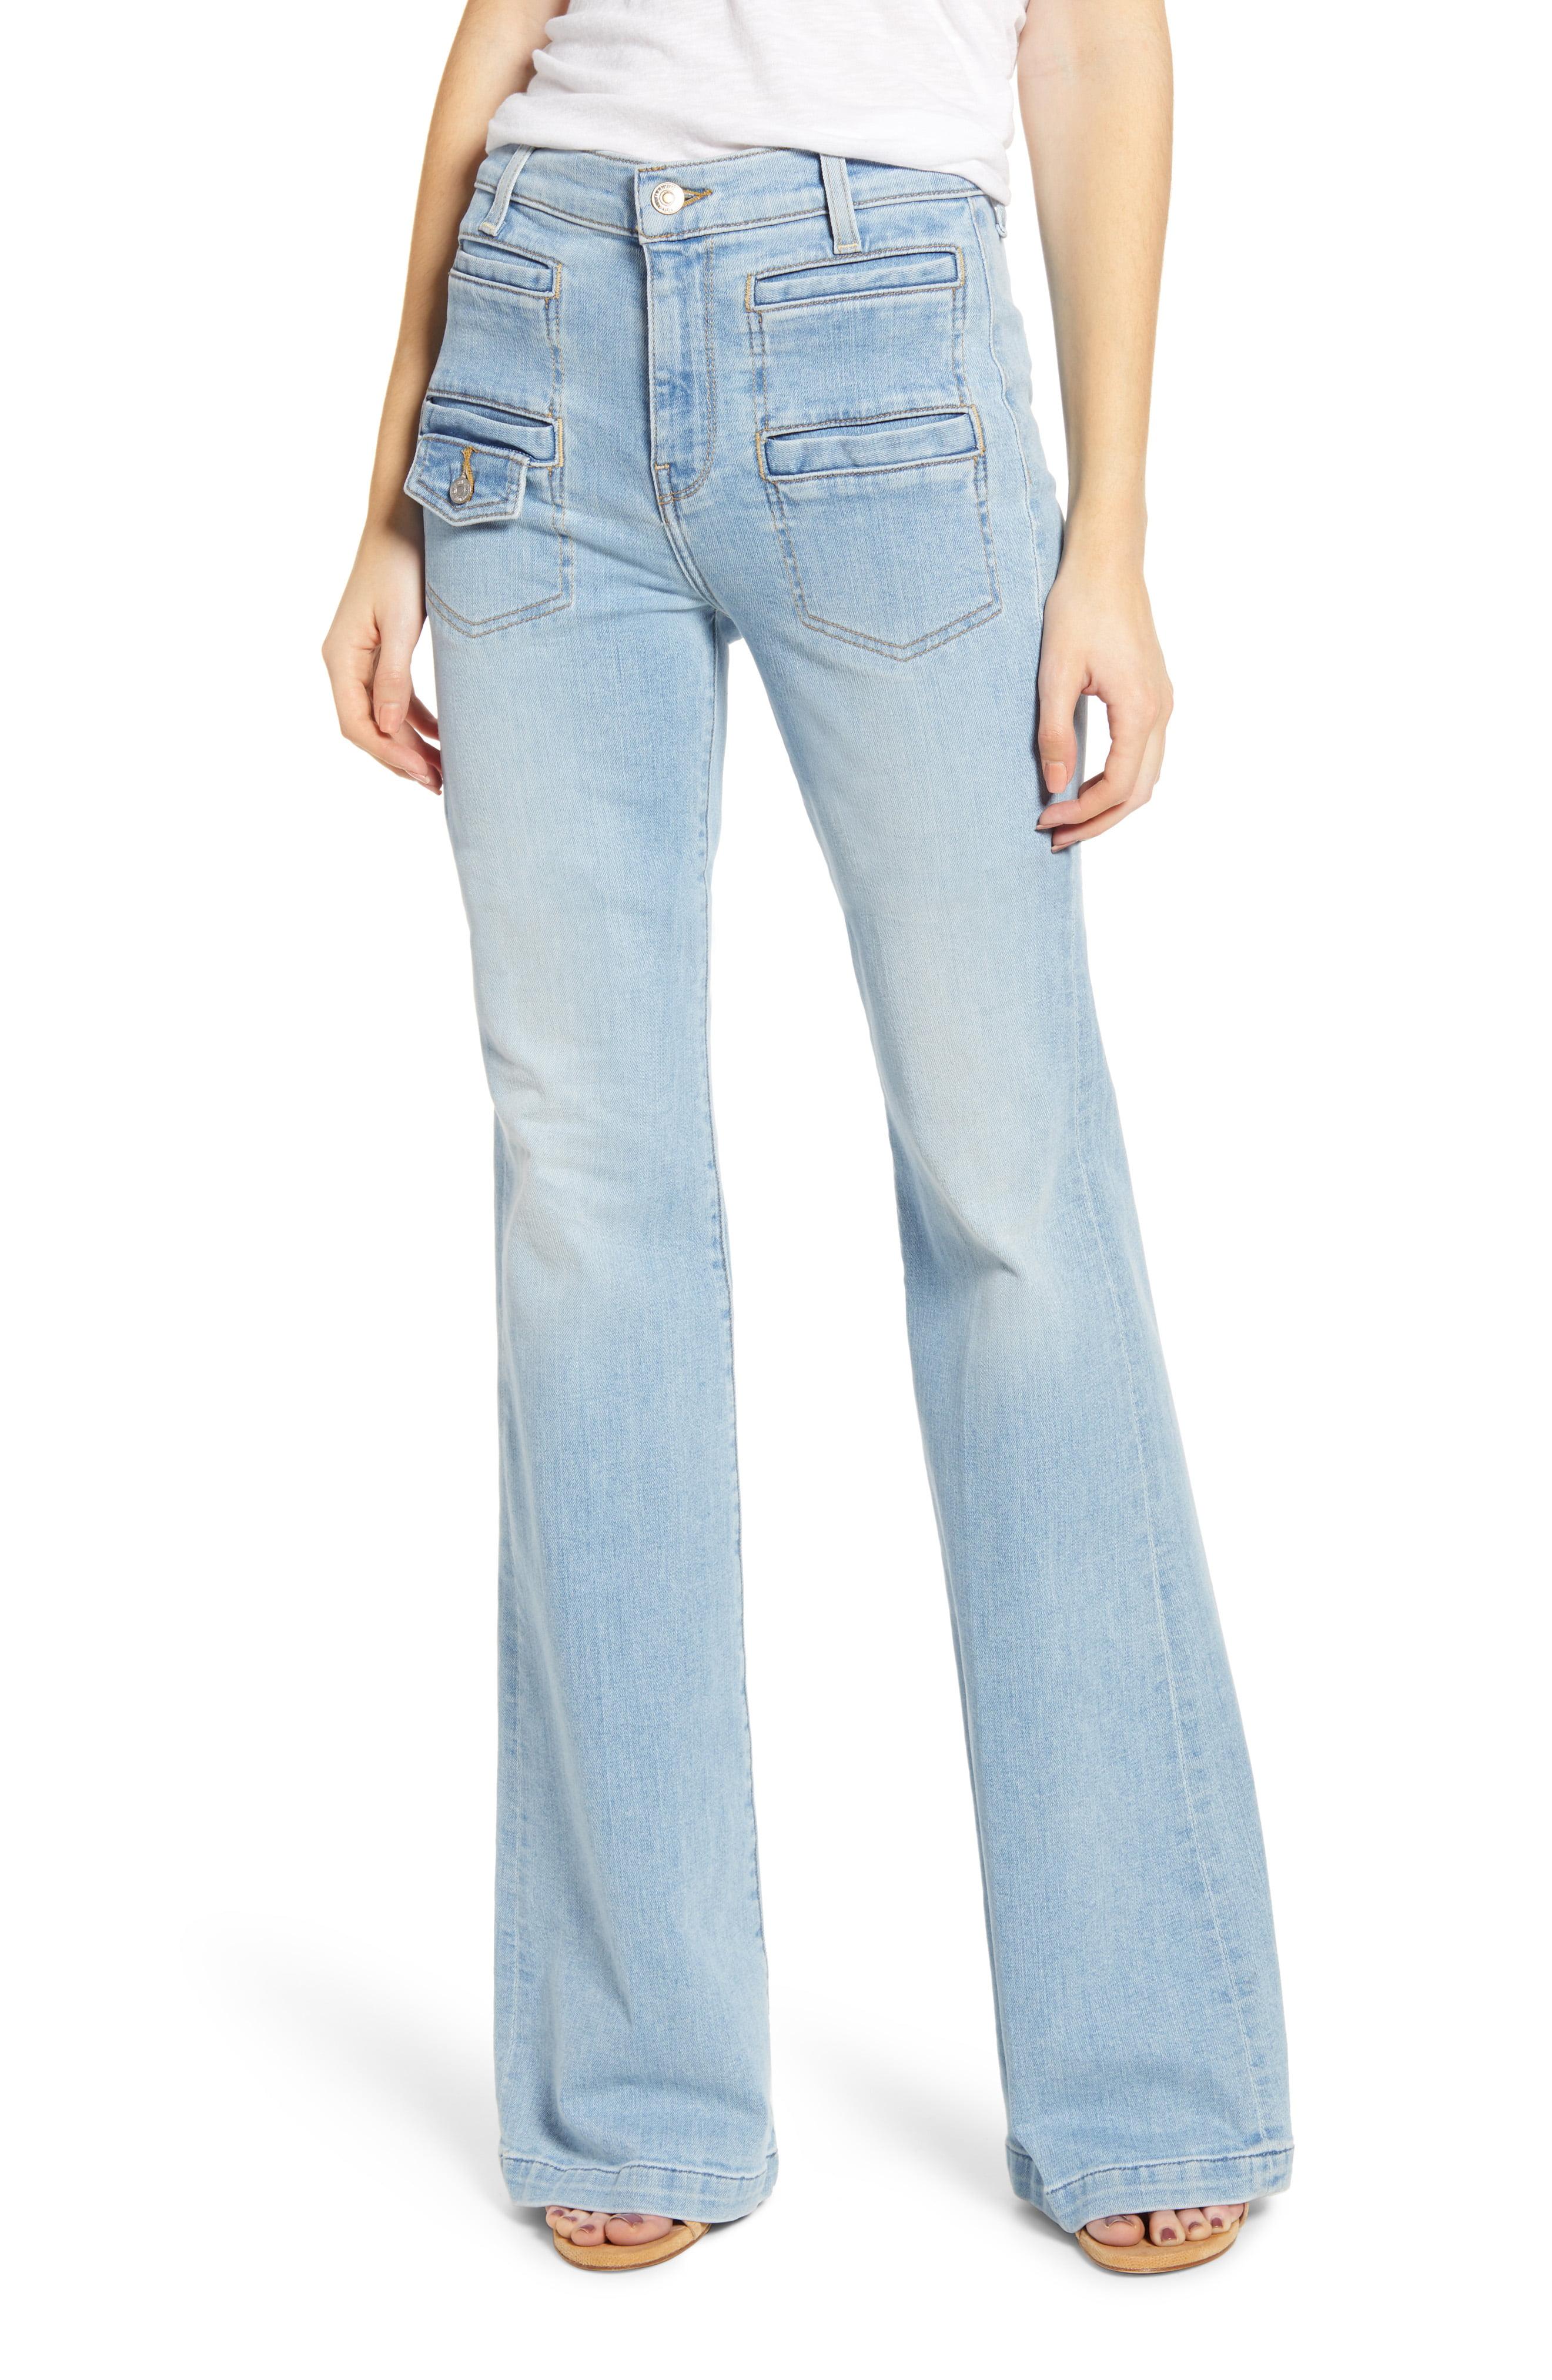 Lyst - 7 For All Mankind 7 For All Mankind Georgia High Waist Flare Jeans in Blue